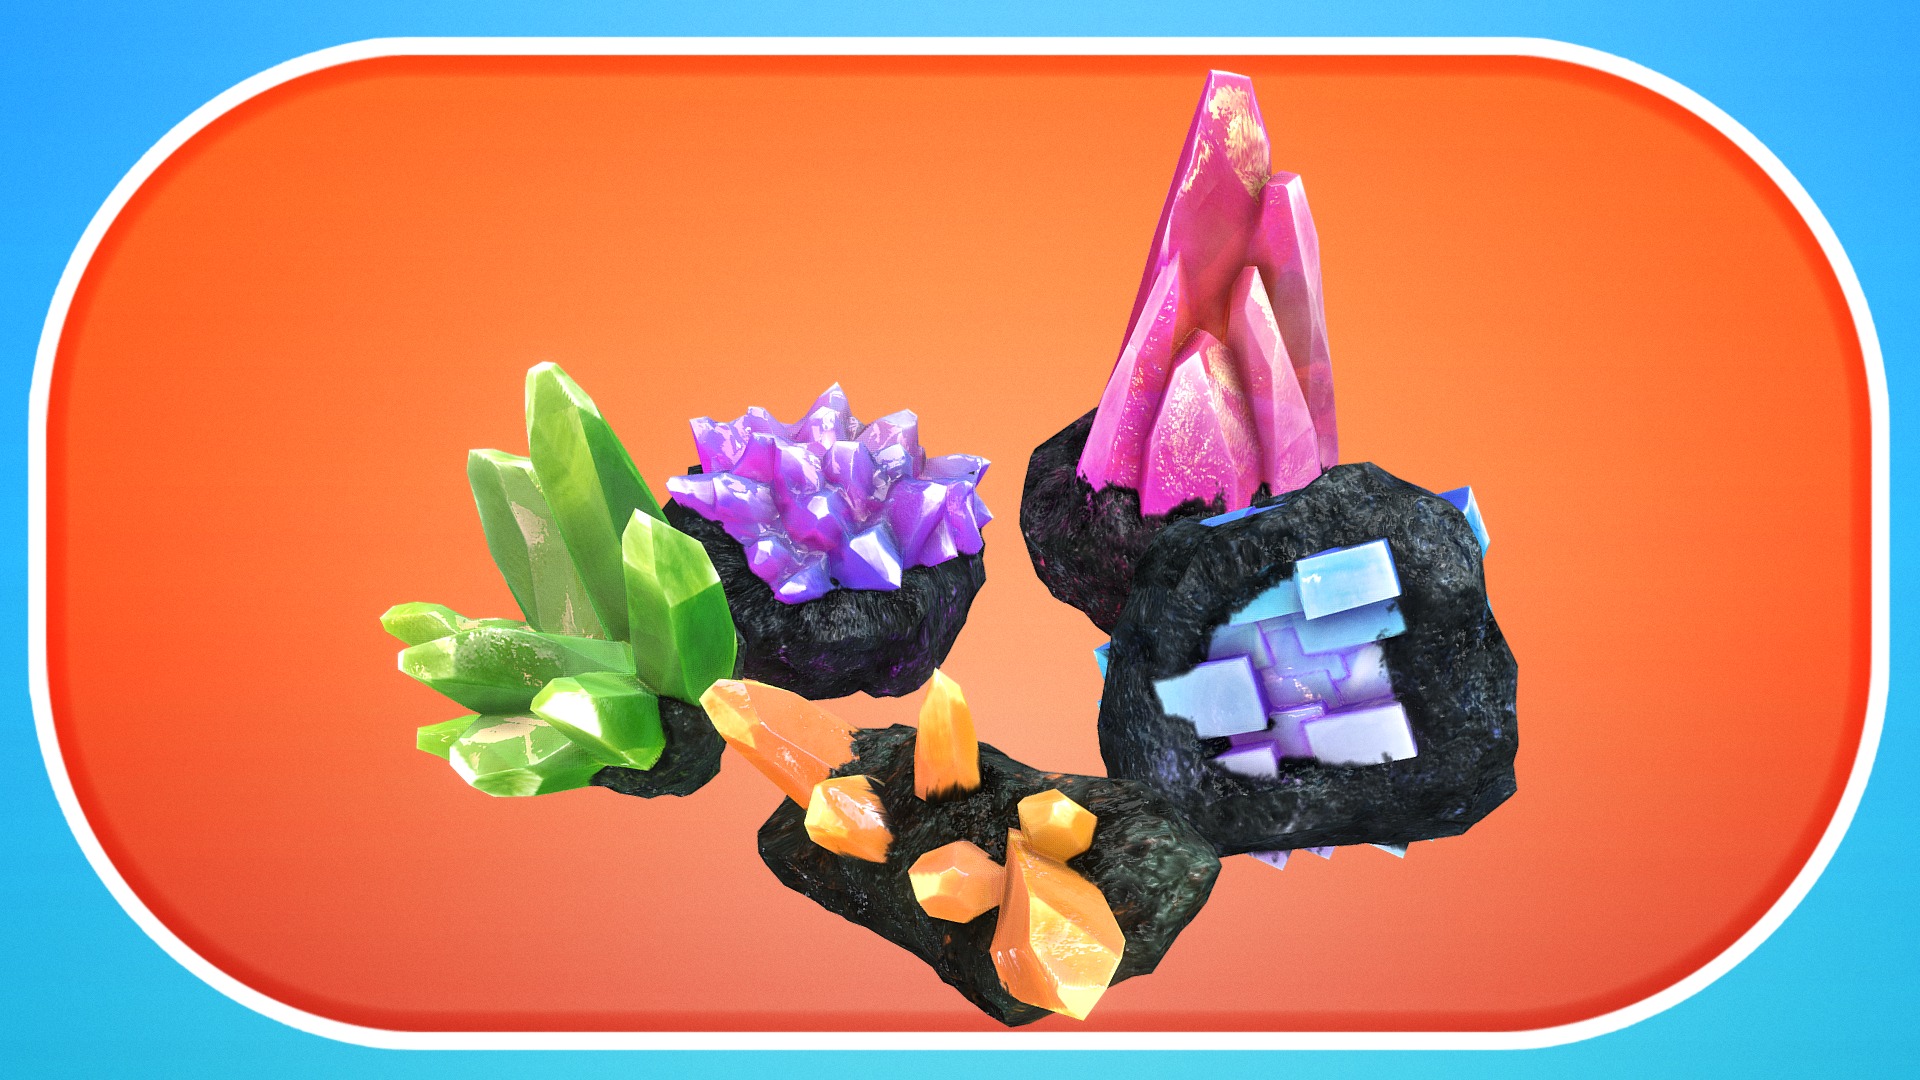 This pack is intended to offer the best deal for crystal gems out there.
It contains:





75 different crystal assets




15 unique meshes




and 5 different color schemes.



It also comes with PBR textures + additional maps like translucency, color masks and specular level in case you want to use custom shaders or tweak the textures to better fit your project.

The crystals are modeled watertight and can be used from any angle. They work alone, but can easily be kit-bashed to create even more shapes and structures. This package is intended for use on desktop pc and consoles due to it's PBR nature, but if necessary it can be further poly-reduced and still look nice with just a single texture in legaxy rendering.

Everything is atlased into a single texture sheet to reduce draw calls and optimize workflow efficiency so you'll be able to tweak the whole set of a single color scheme with one material 3d model